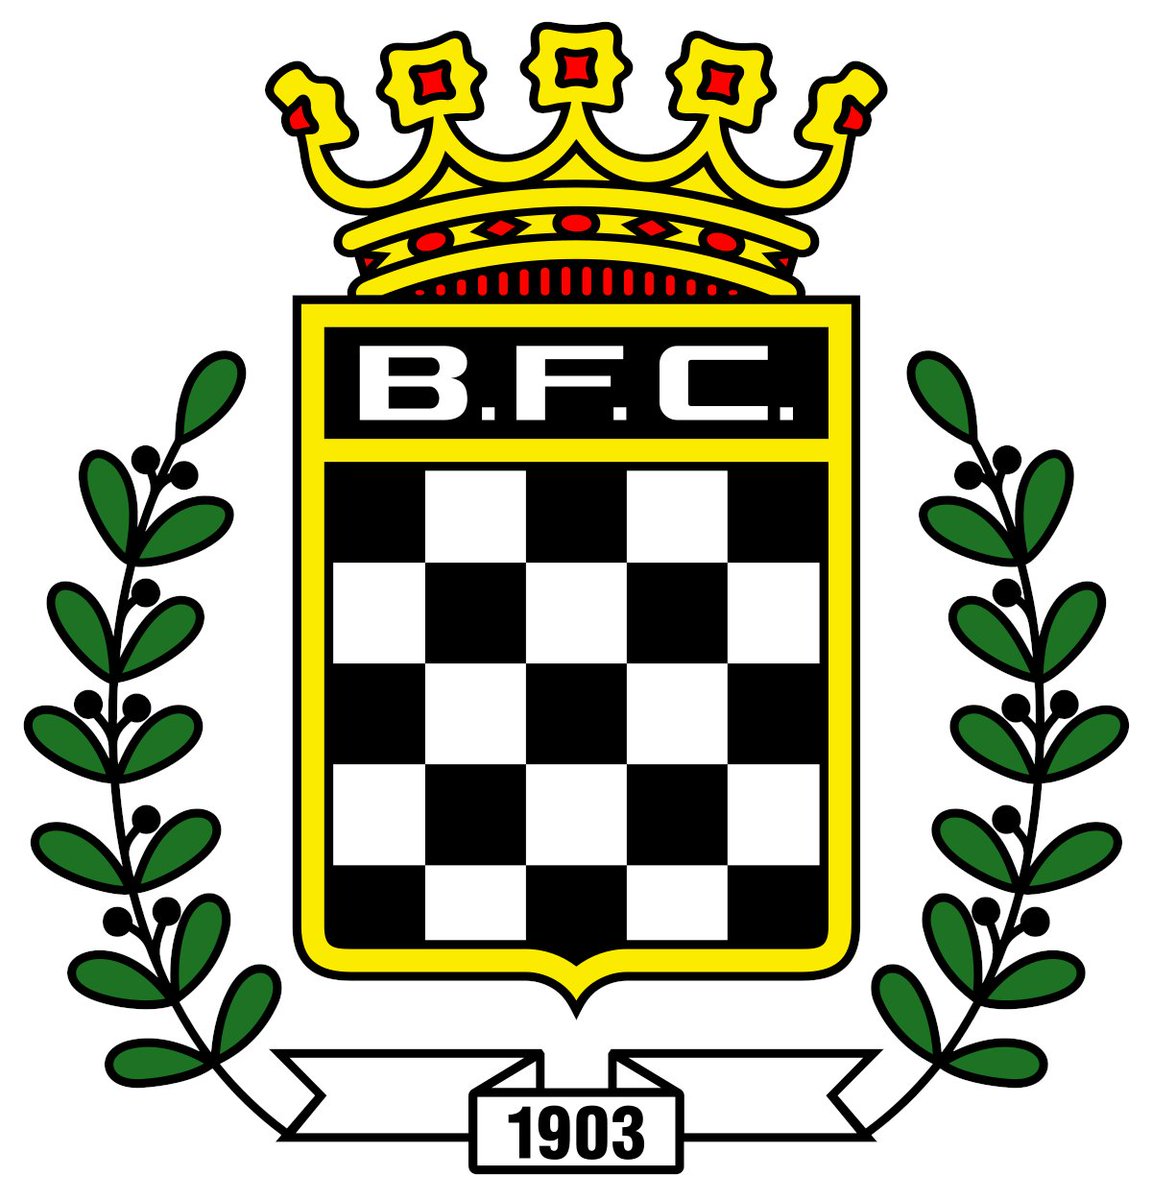 Is Portugal the country with best badges?1.  @VitoriaSC1922 So proud.2.  @academicaoaf Clever design.3.  @MaritimoMadeira There should always be a lion.4.  @boavistaoficial They did chess long before Queen's Gambit.7/26 #conquistadores  #Briosa  #CSMaritimo  #boavistafc